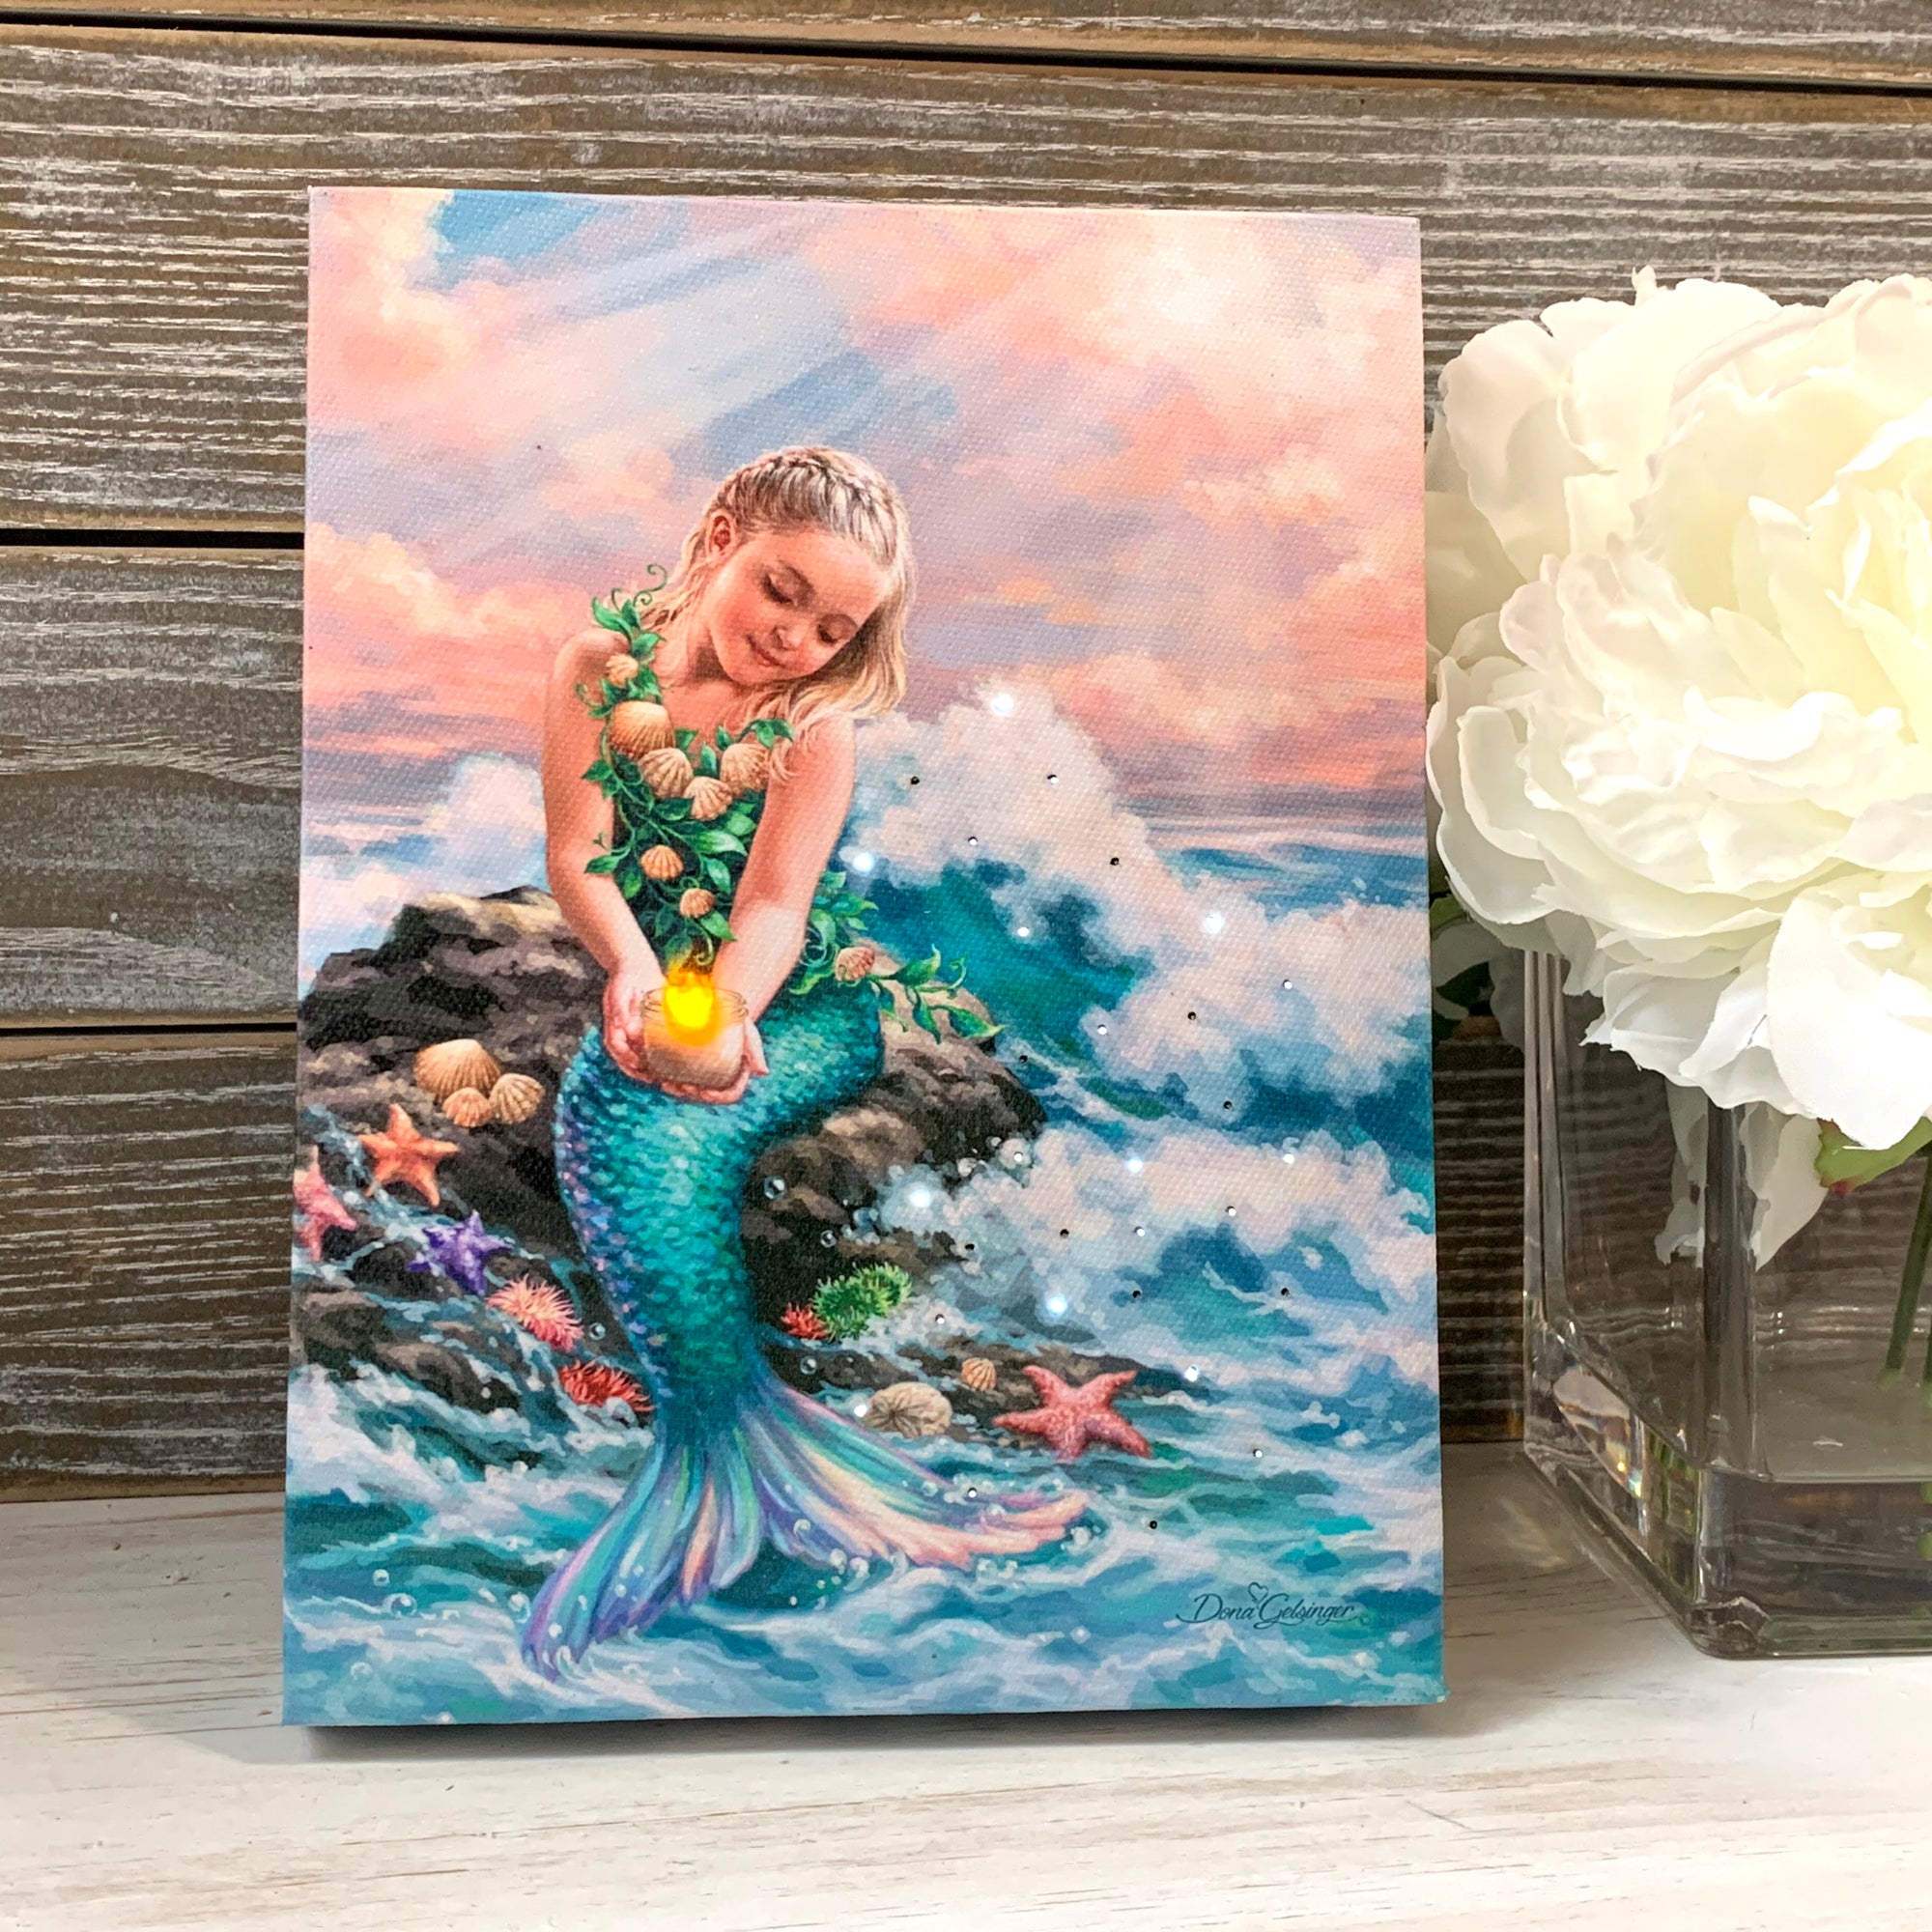 a beautiful young mermaid sits atop a boulder adorned with delicate sea shells, swaying sea anemones, and sparkling star fish. Her eyes light up with joy as she gazes down at the flickering candle in her hand, its gentle glow casting a warm and inviting ambiance all around. The waves crash onto the rock.